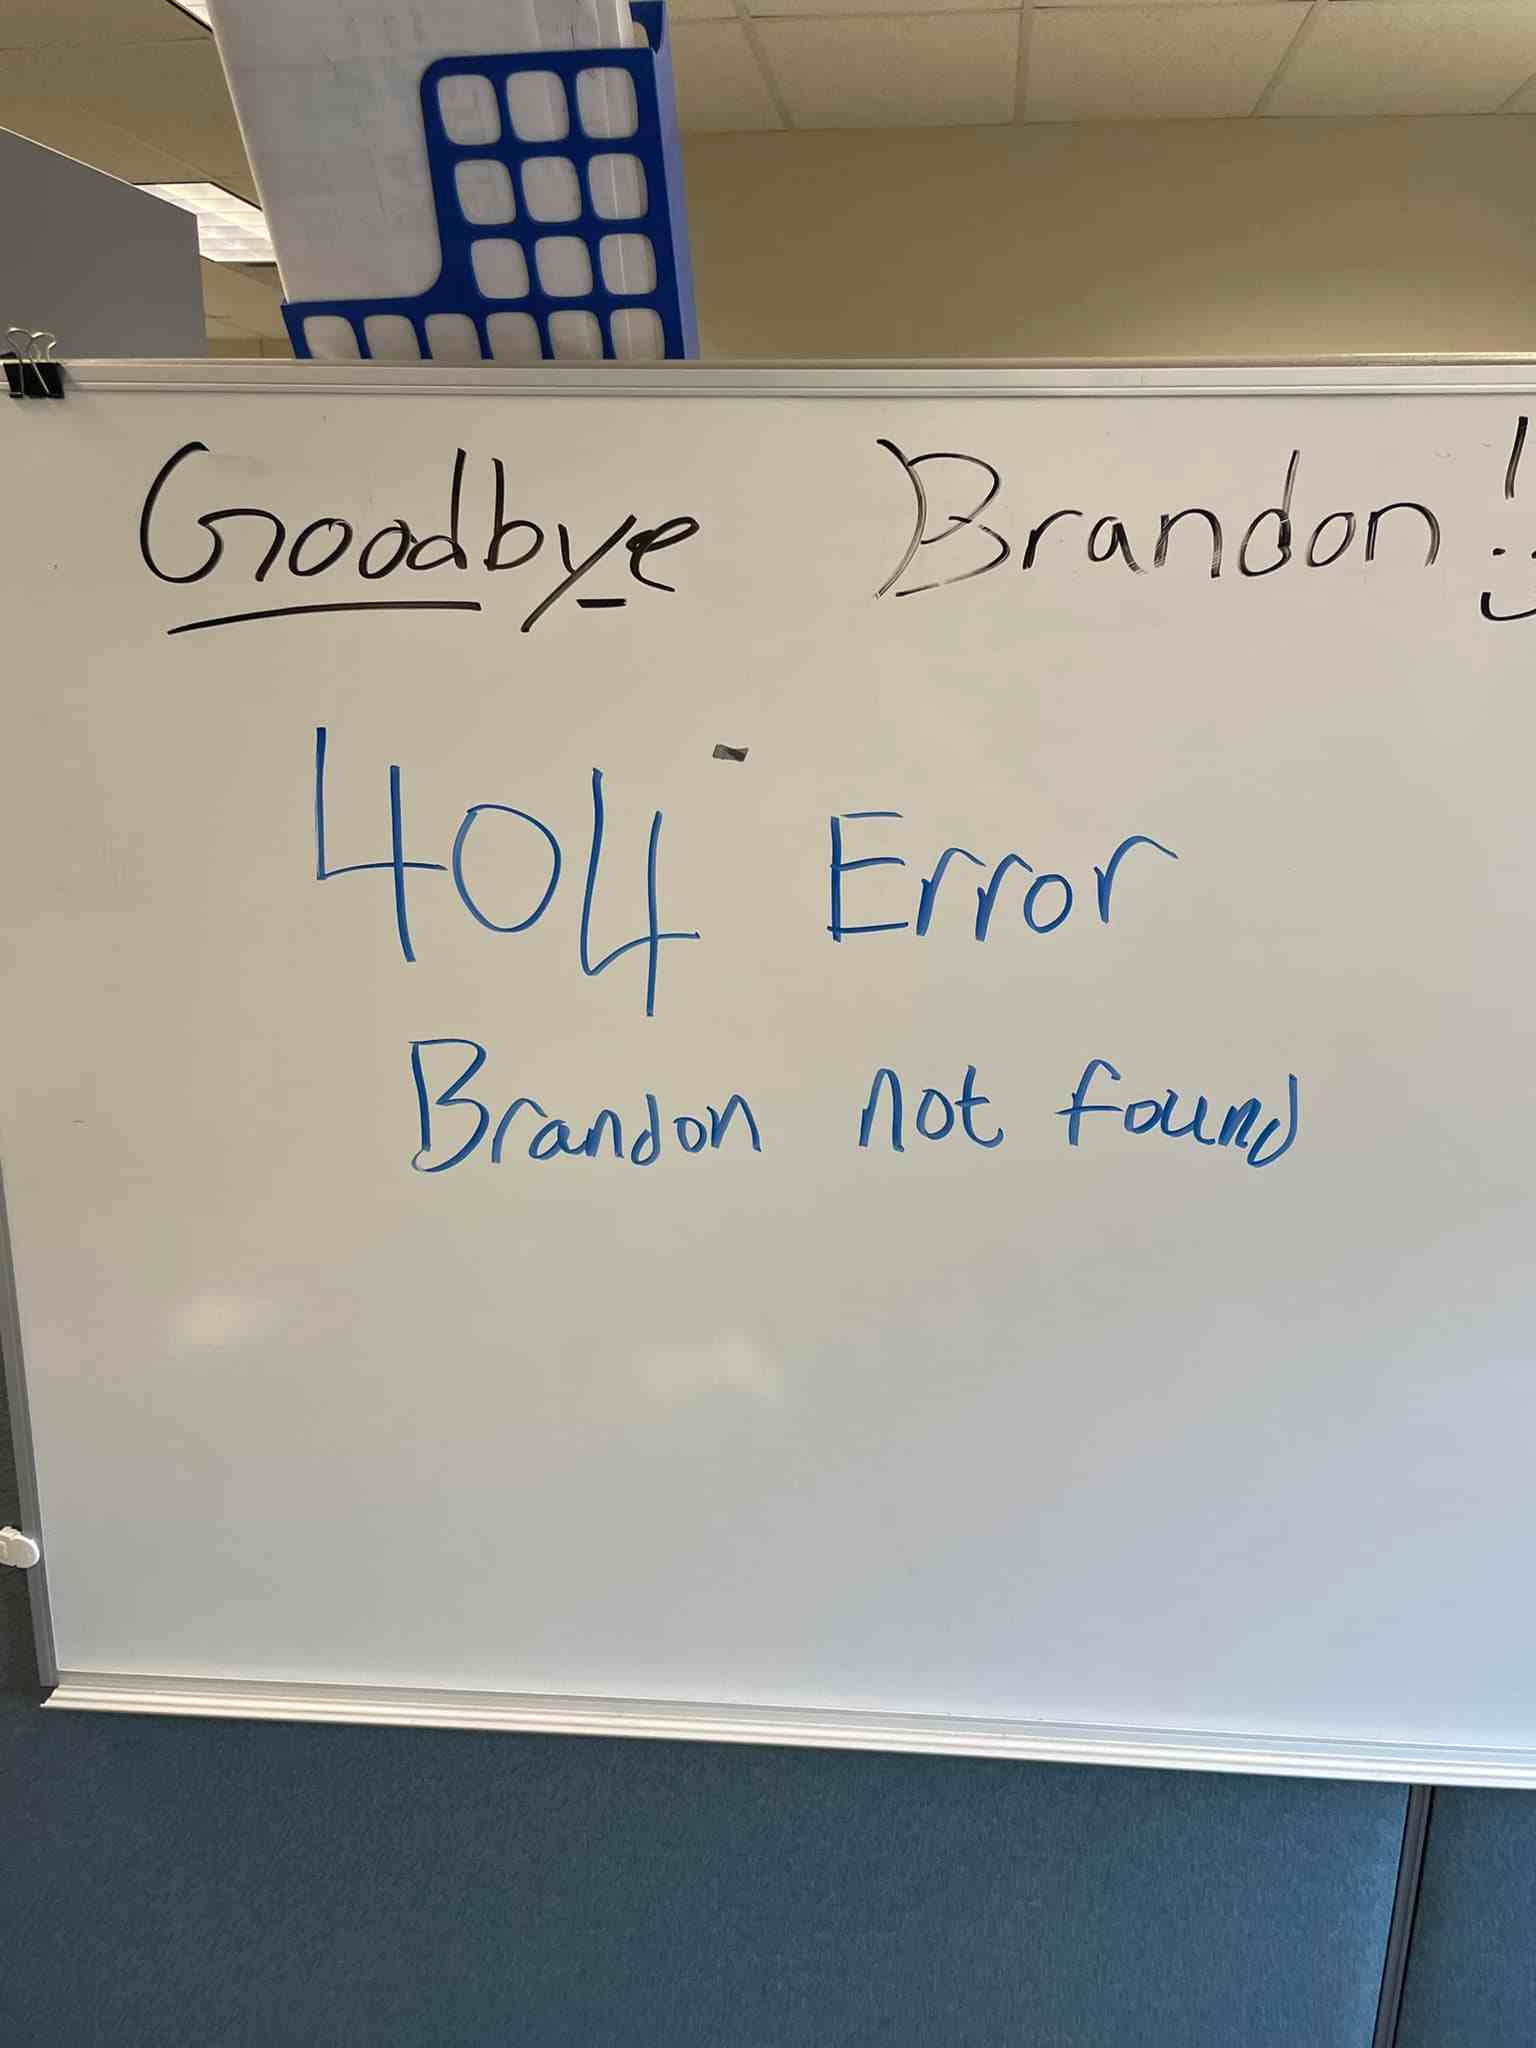 Today is my last day at my current job, Left a nice little note on my whiteboard